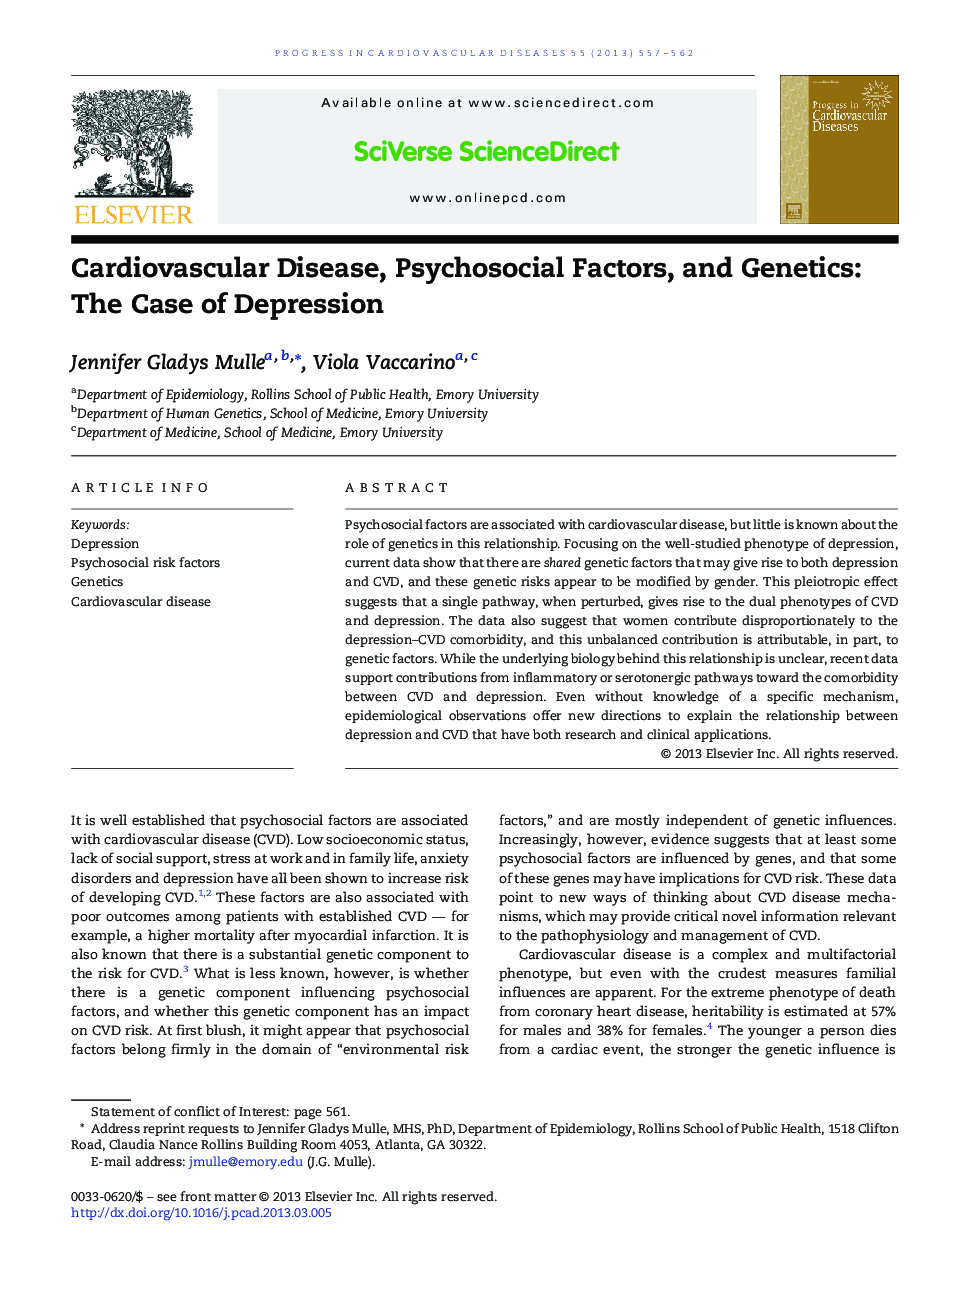 Cardiovascular Disease, Psychosocial Factors, and Genetics: The Case of Depression 